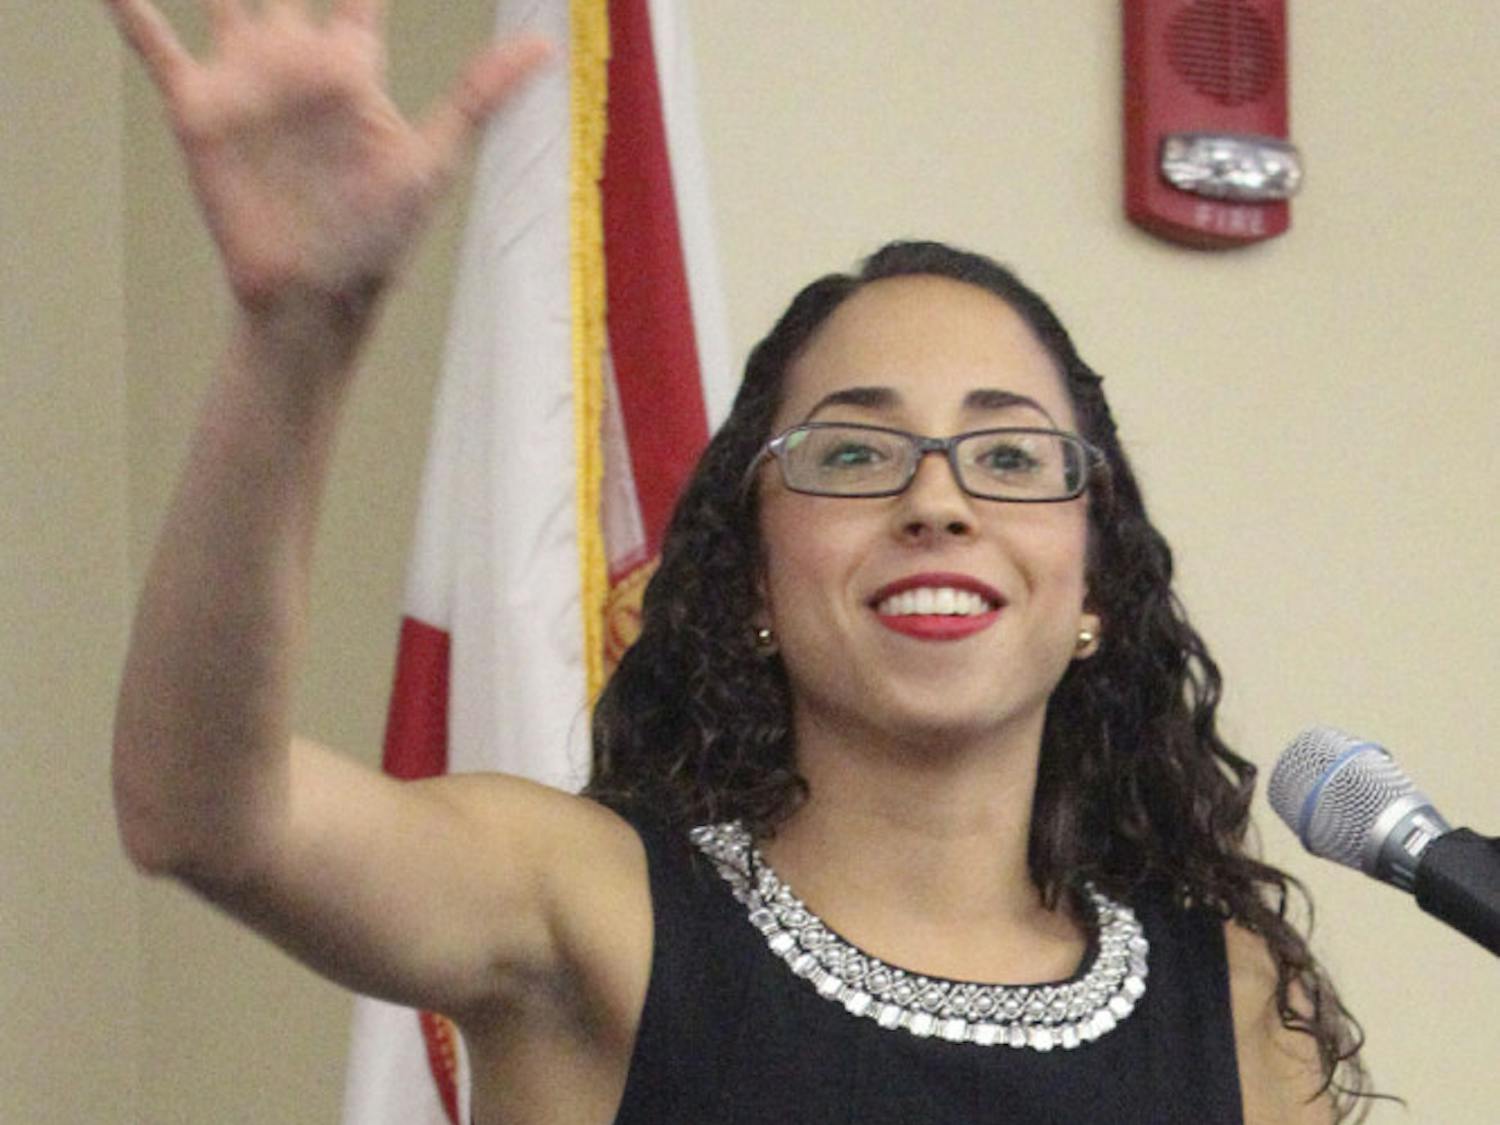 UF Student Body President Joselin Padron-Rasines gives the 2015 State of the Campus Address on Nov. 16, 2015.